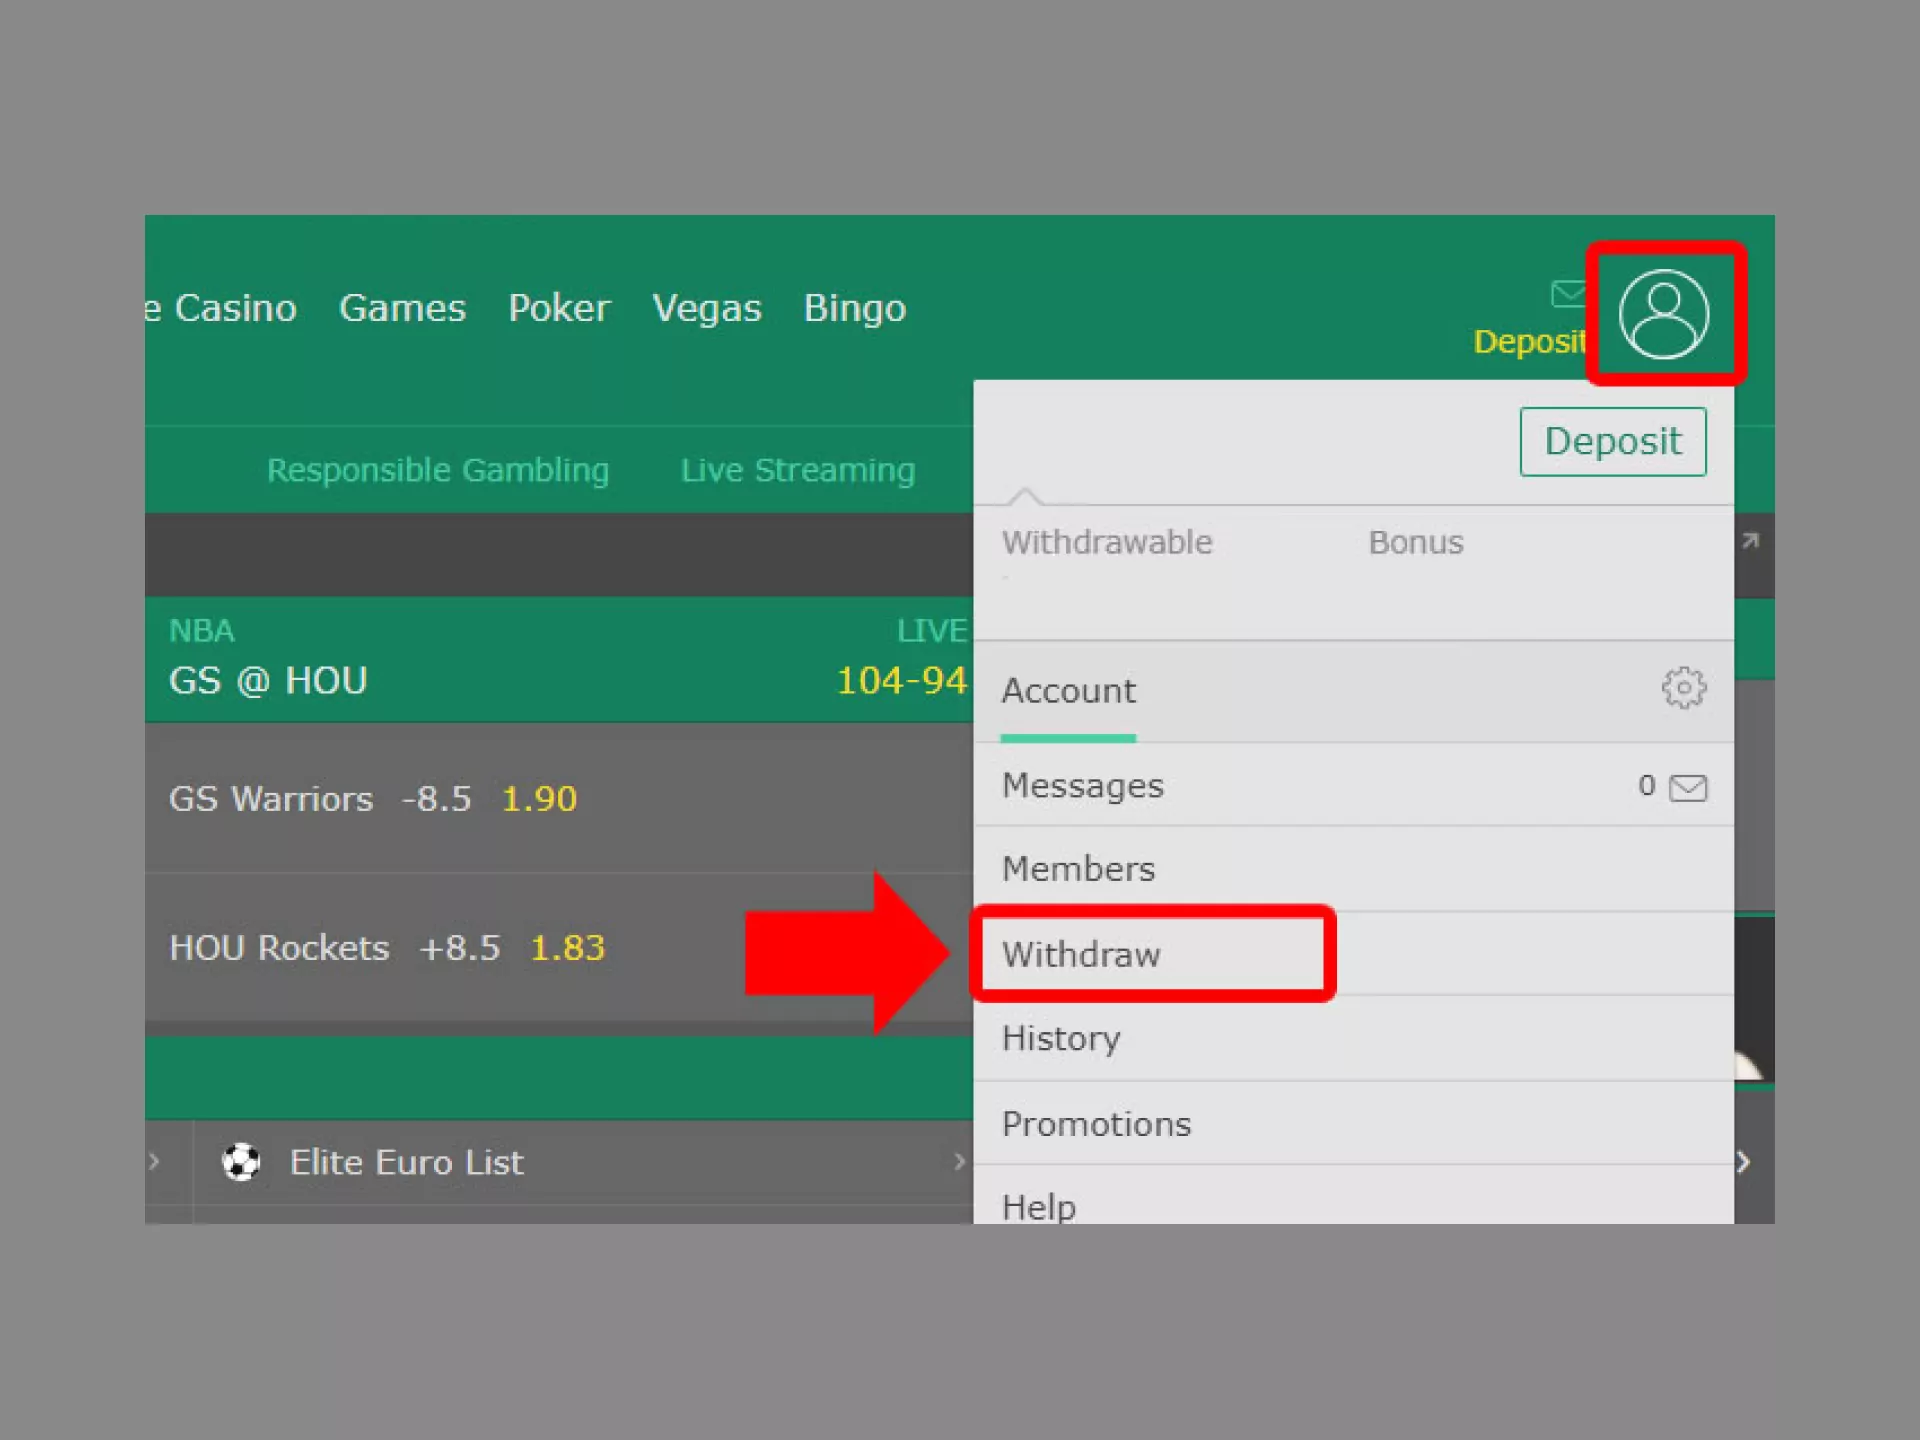 After making a few winning bets you can withdraw your money.